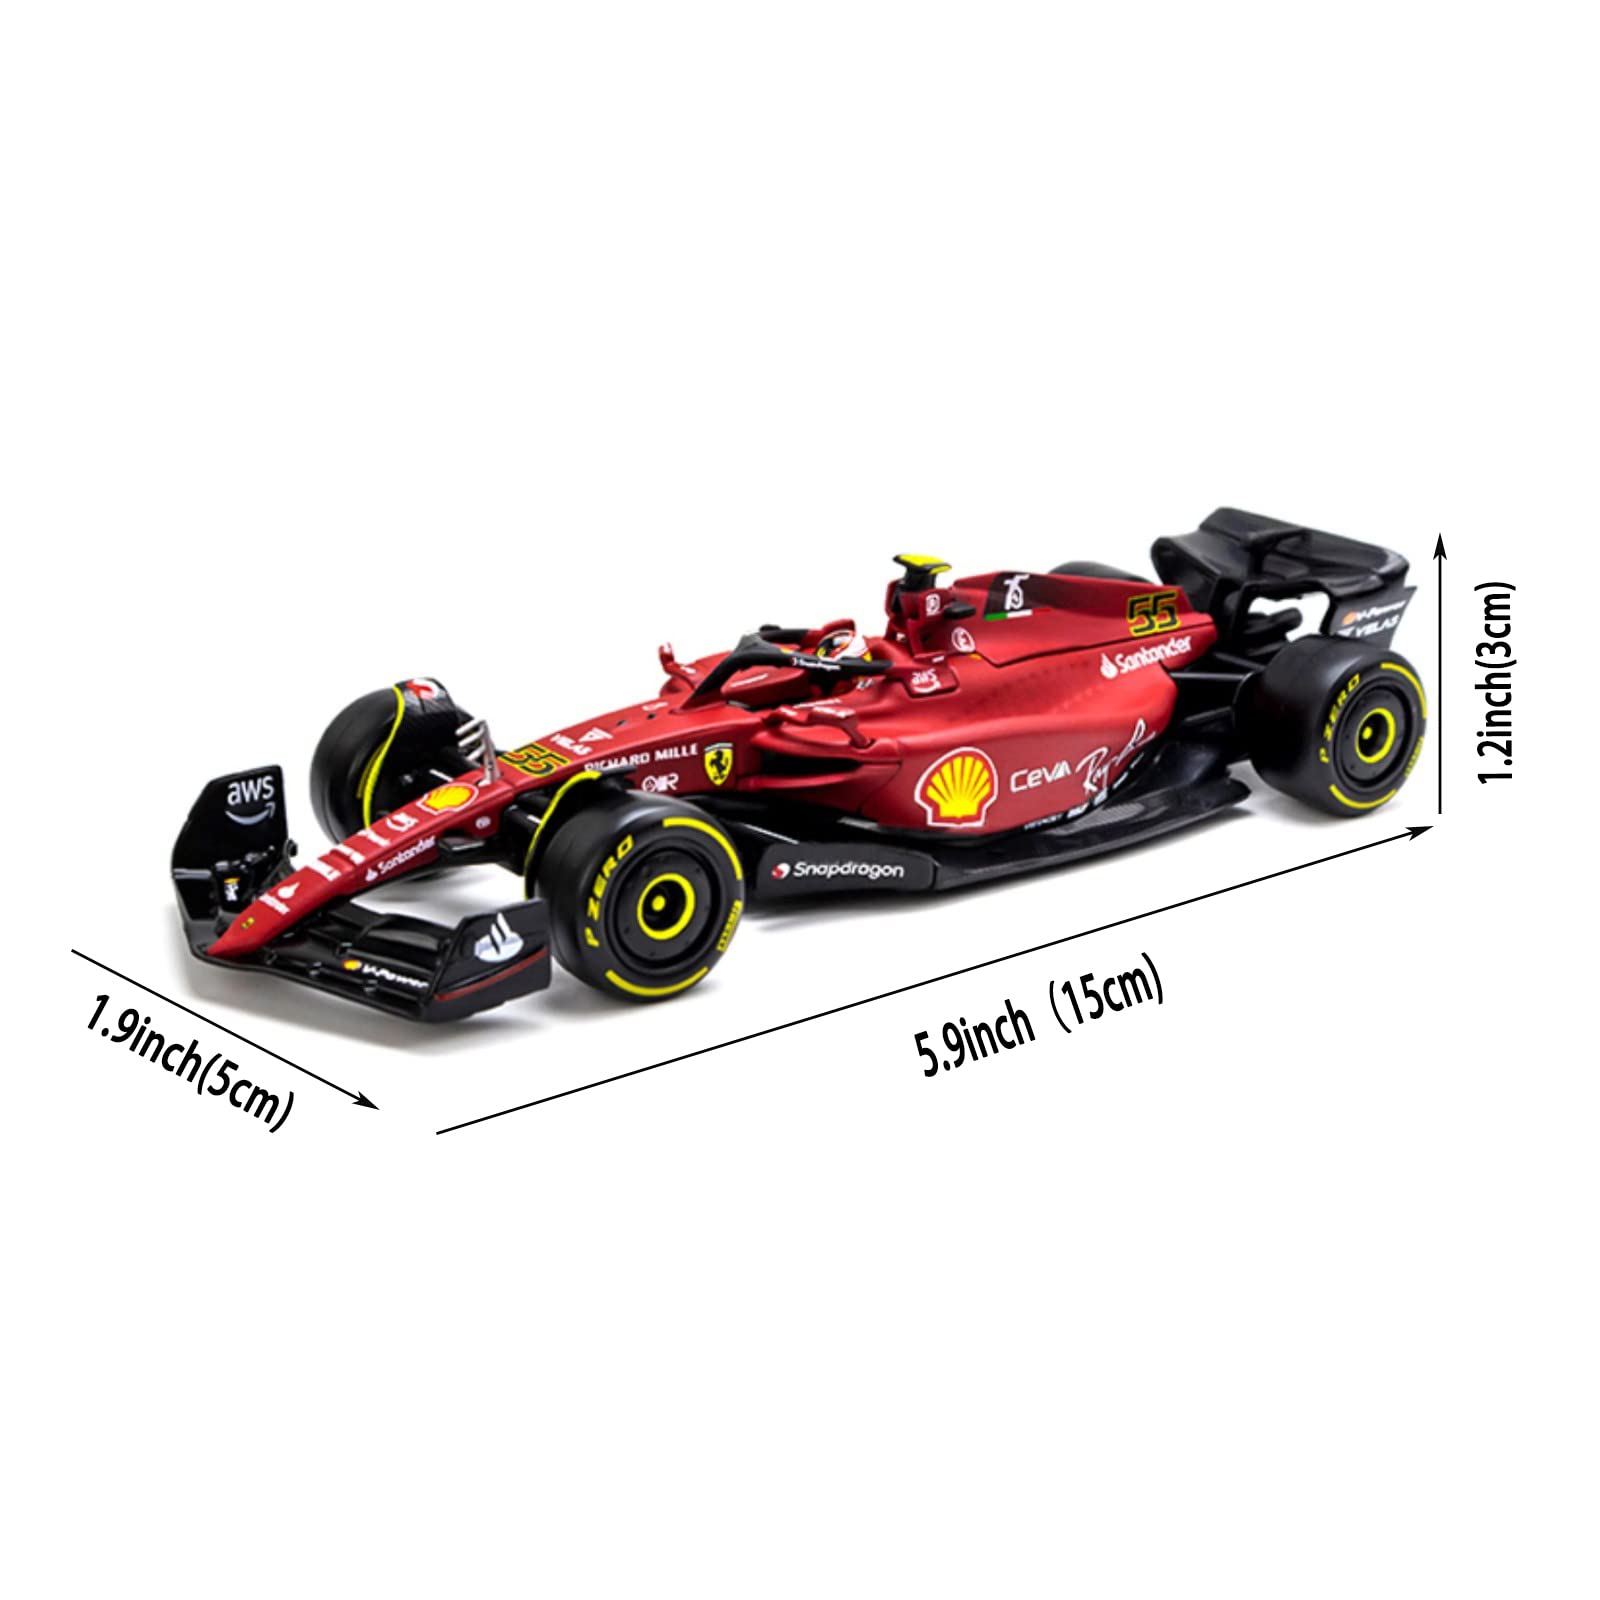 HTLNUZD Bburago 1:43 Latest 2022 F1-75#55 Carlos Sainz 1/43 Alloy Racing F1-75#55 Luxury Formula One Static Die Cast Vehicles Collectible Car Model Collection Gifts (Hardcover F1-75#55)